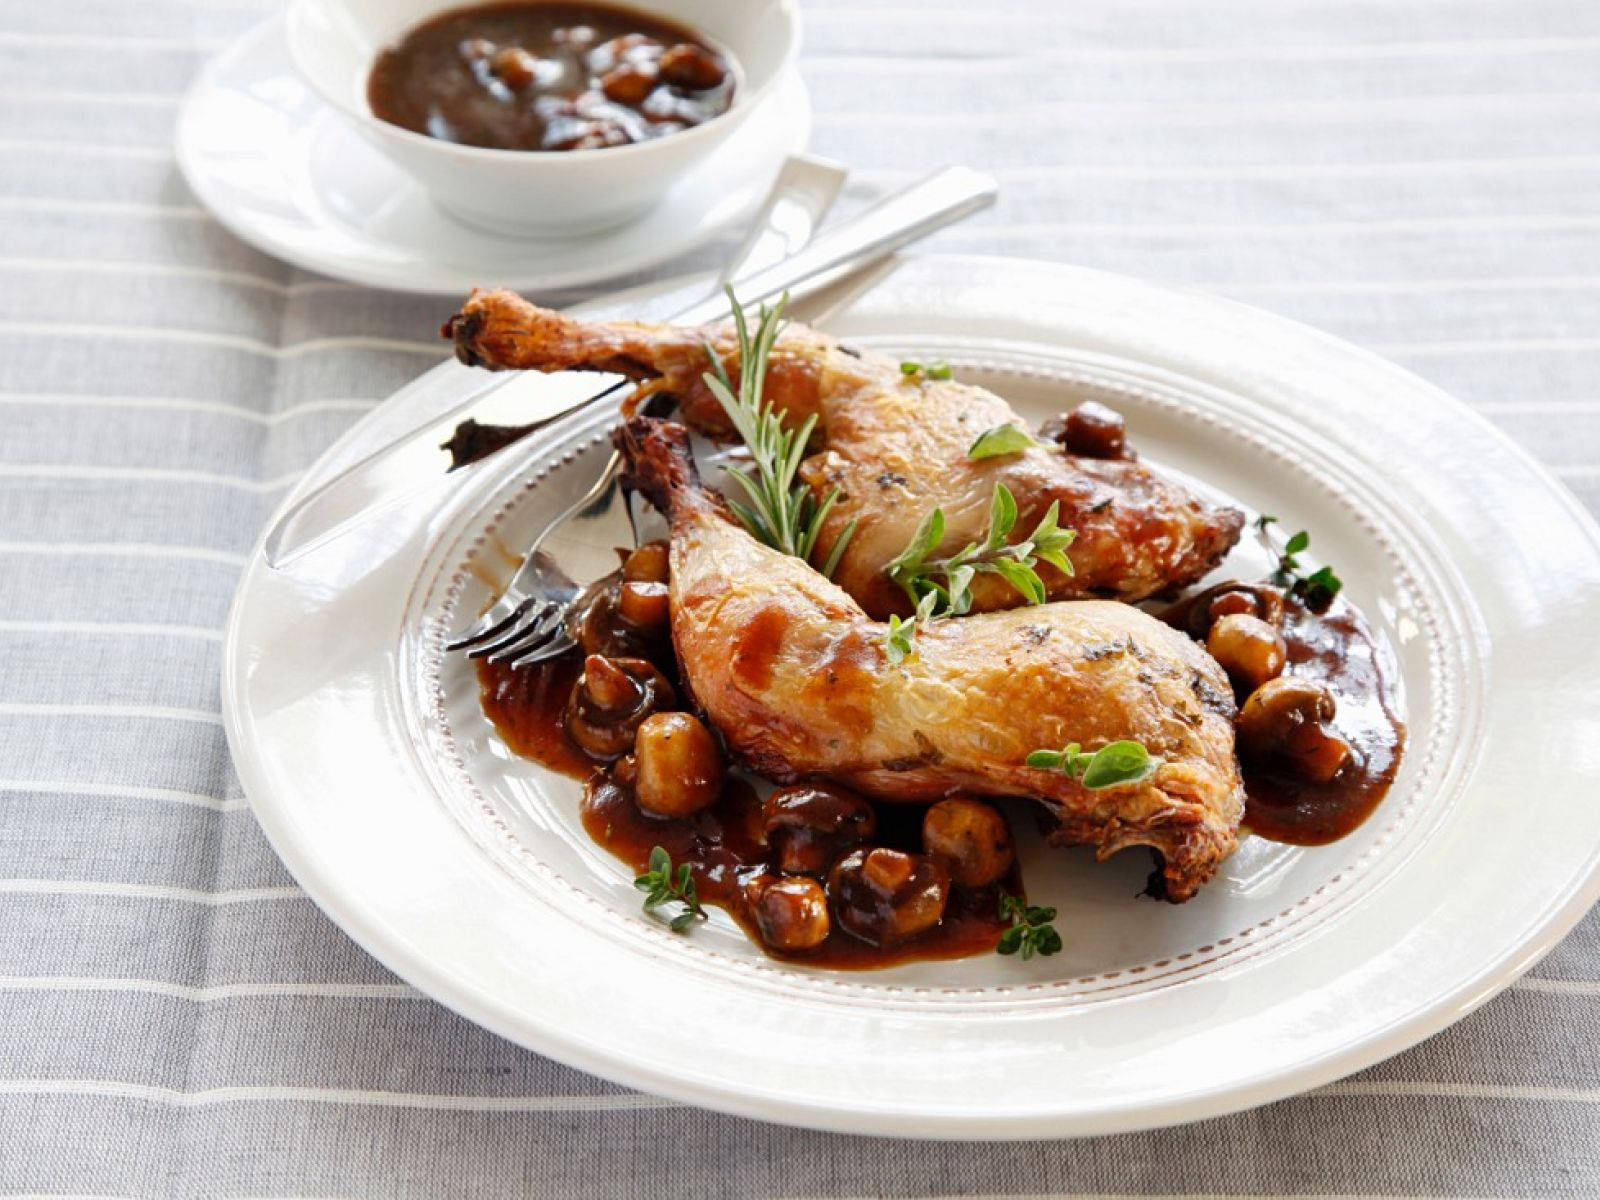 Food Photograph Of Classic French Coq Au Vin Wallpaper